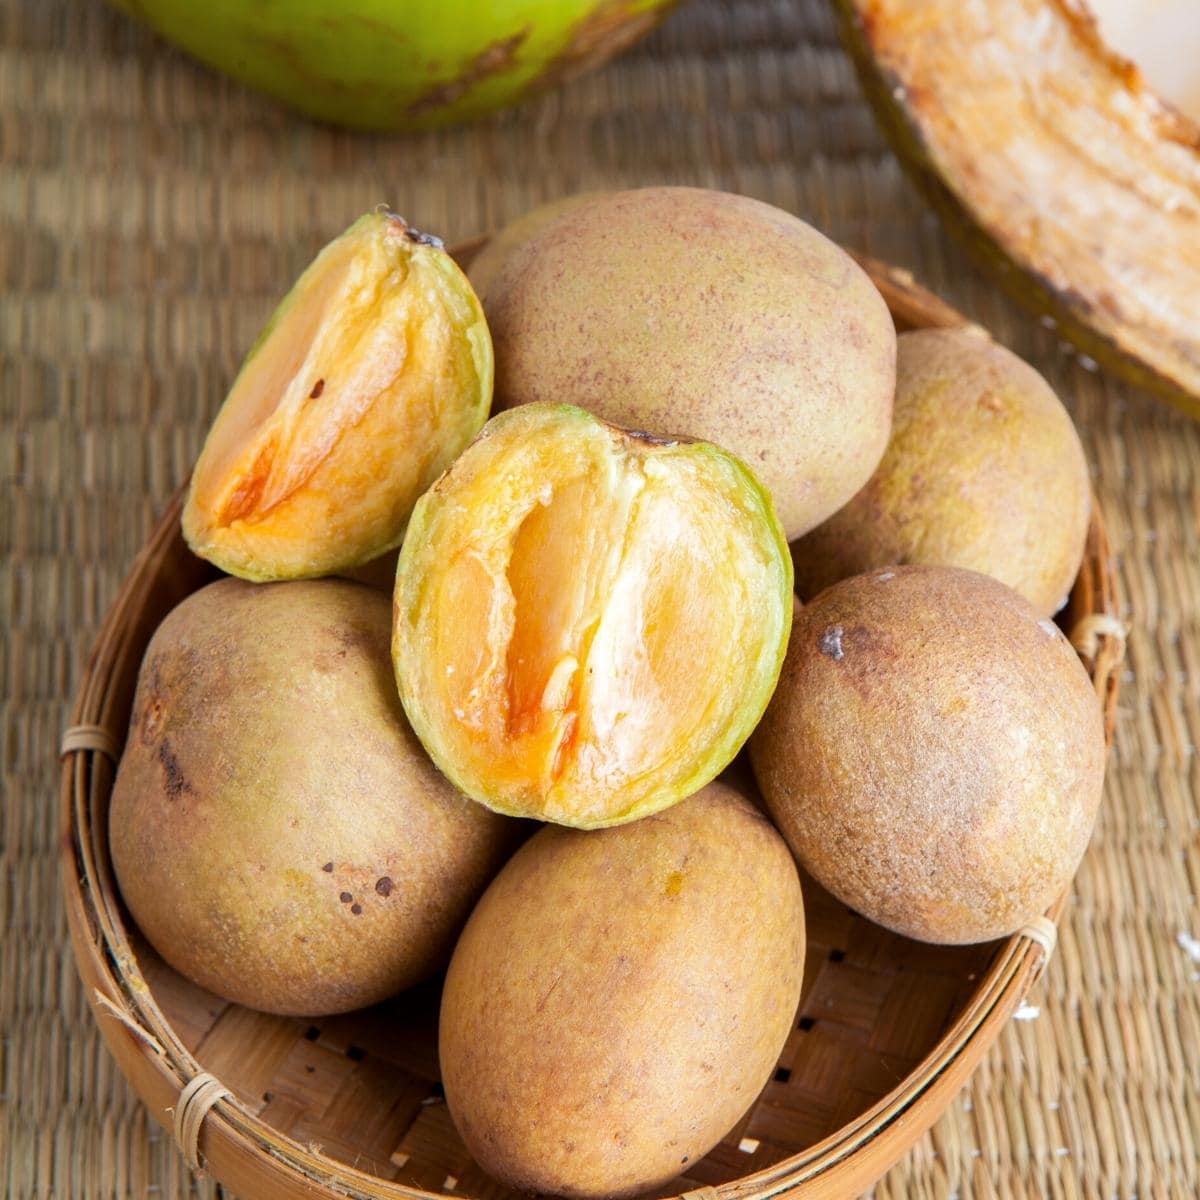 A pile of sapodilla fruit resting in a wooden basket.